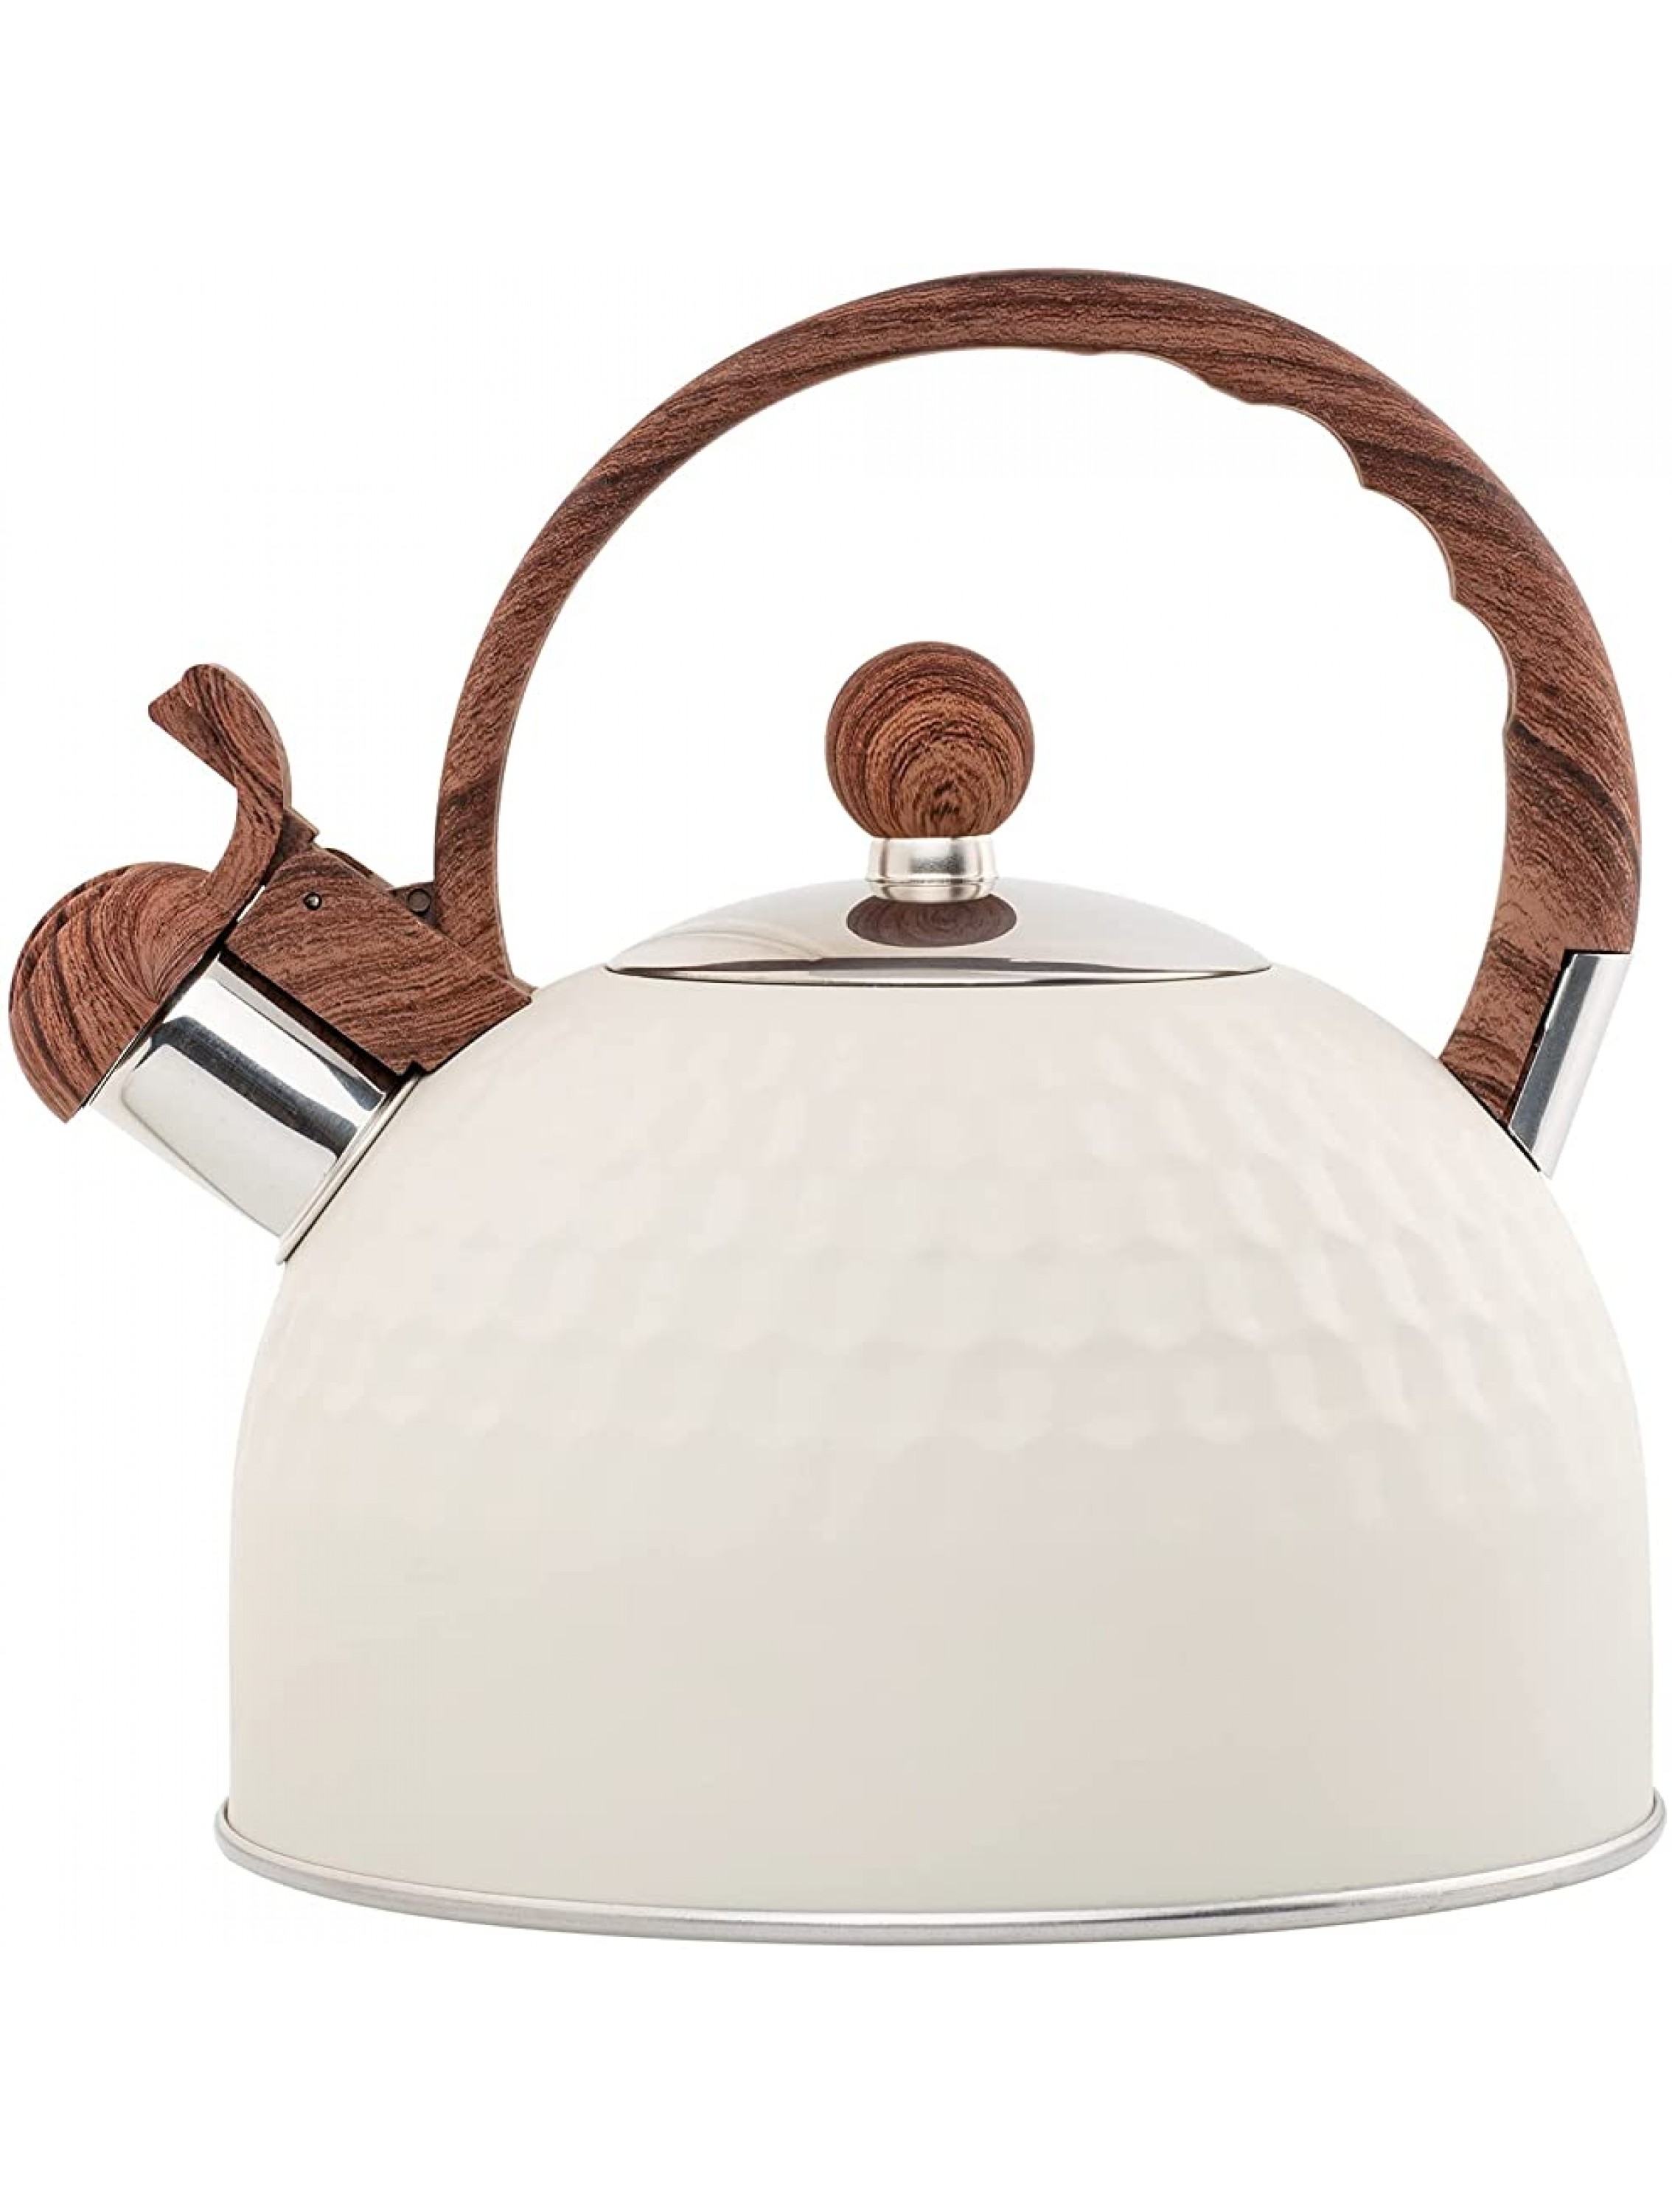 Whistling Stainless Steel Tea Kettle with Wood Grain Anti Heat Handle Cylindrical Wood Grain Stainless Steel Cover 2.6 Quart 2.5 Liter White - BQQSYKW9F